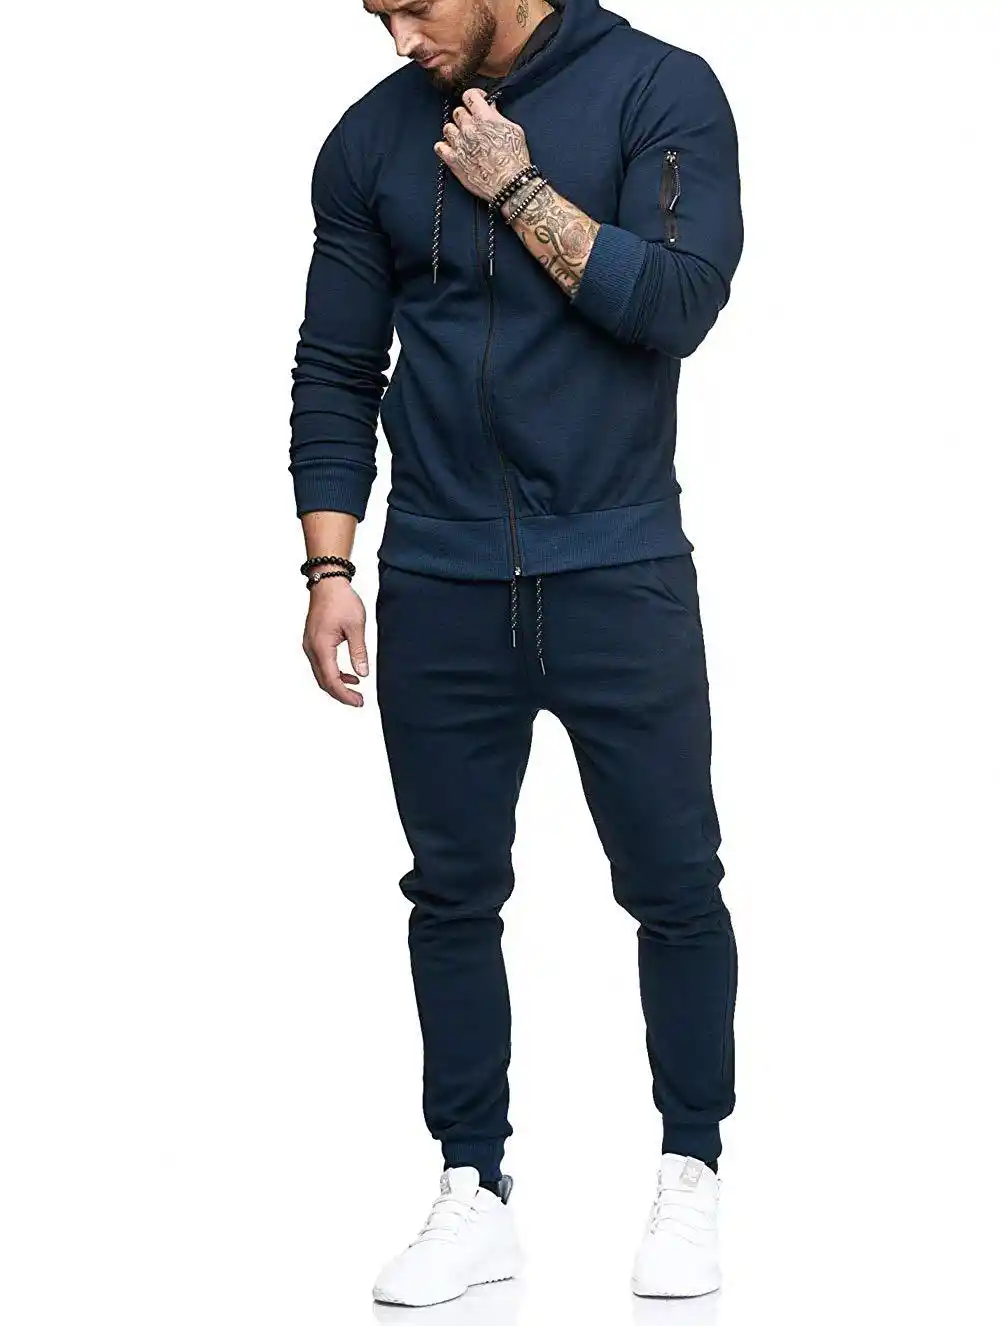 Shop Discounted Fashion Men Shirt Suits Online on ootdmw.com